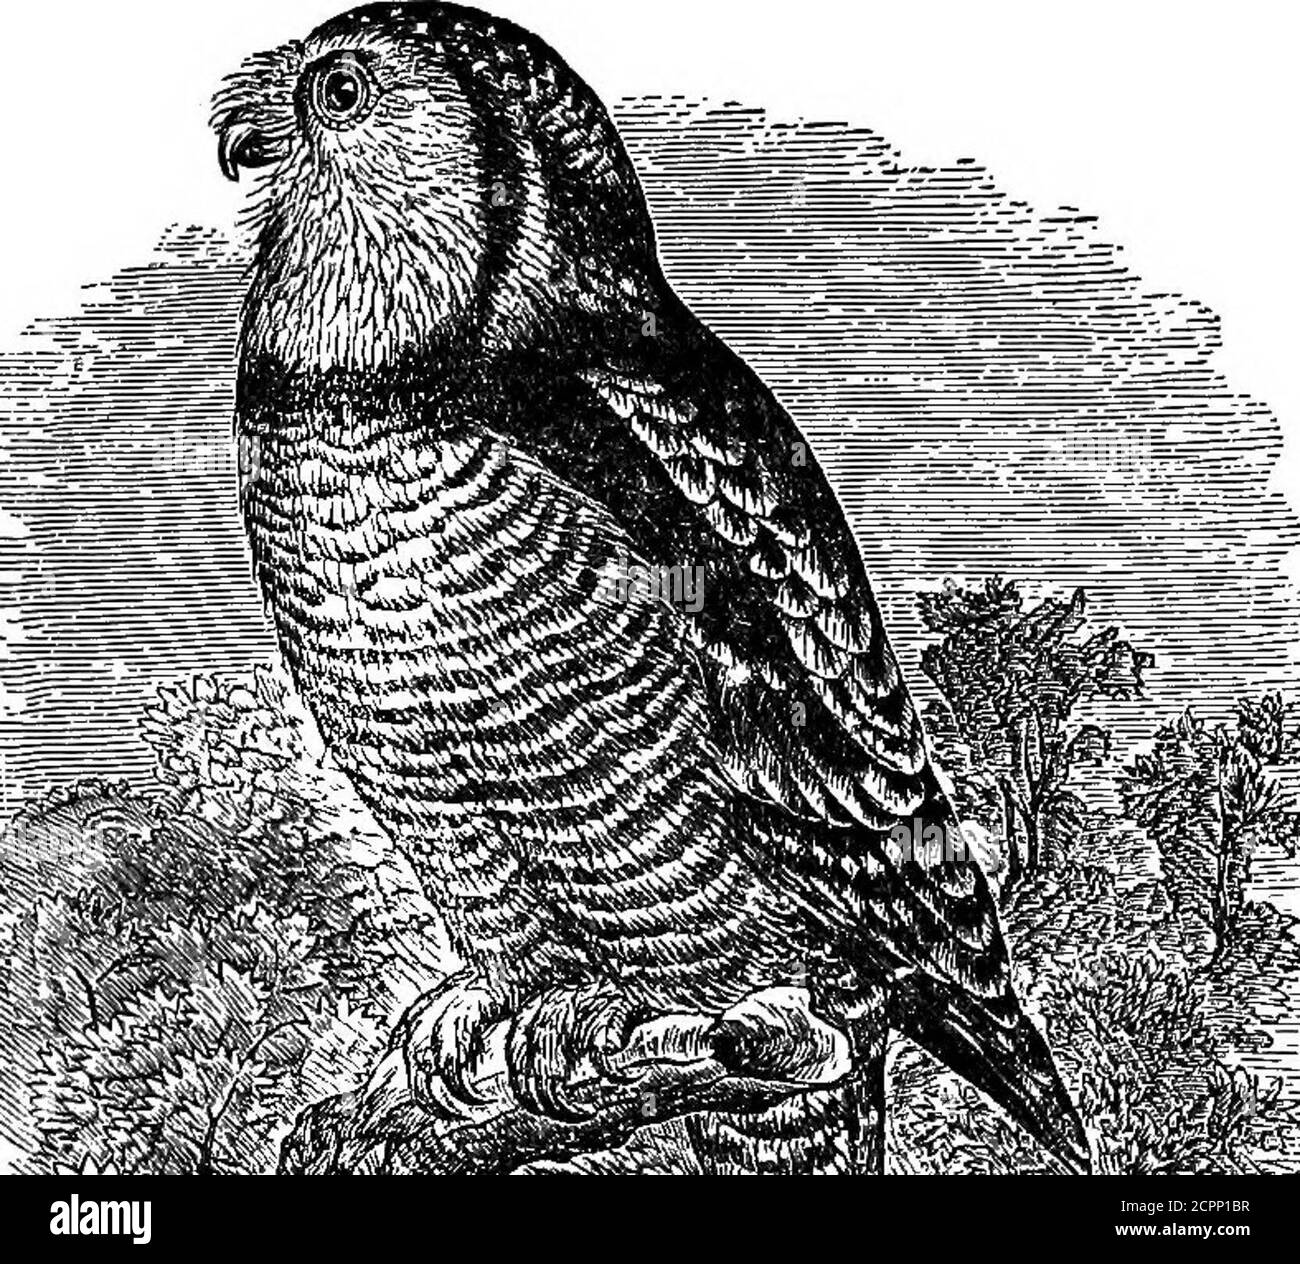 . Our birds in their haunts : a popular treatise on the birds of eastern North America . I HAWK OWL. OUR BIRDS IN THKIR HAUNTS A POPULAR TREATISE ON THE BIRDS OFEASTERN NORTH AMERICA. BY REV. J. HIBBERT LANGILLE, M. A. ■^How pleasant the life of a bird must be.Flitting about in each leafy tree;In the leafy trees, so broad and tall.Like a green and beautiful Palace hall,With its airy chambers^ light and boon.That open to sun, and stars and moon.That open into the bright blue sky,And the frolicksome winds as they wander by. Mary Howitt. NEW YORK: ORANGE JUDD CO.1892. [,%n^^ Entered, according Stock Photo